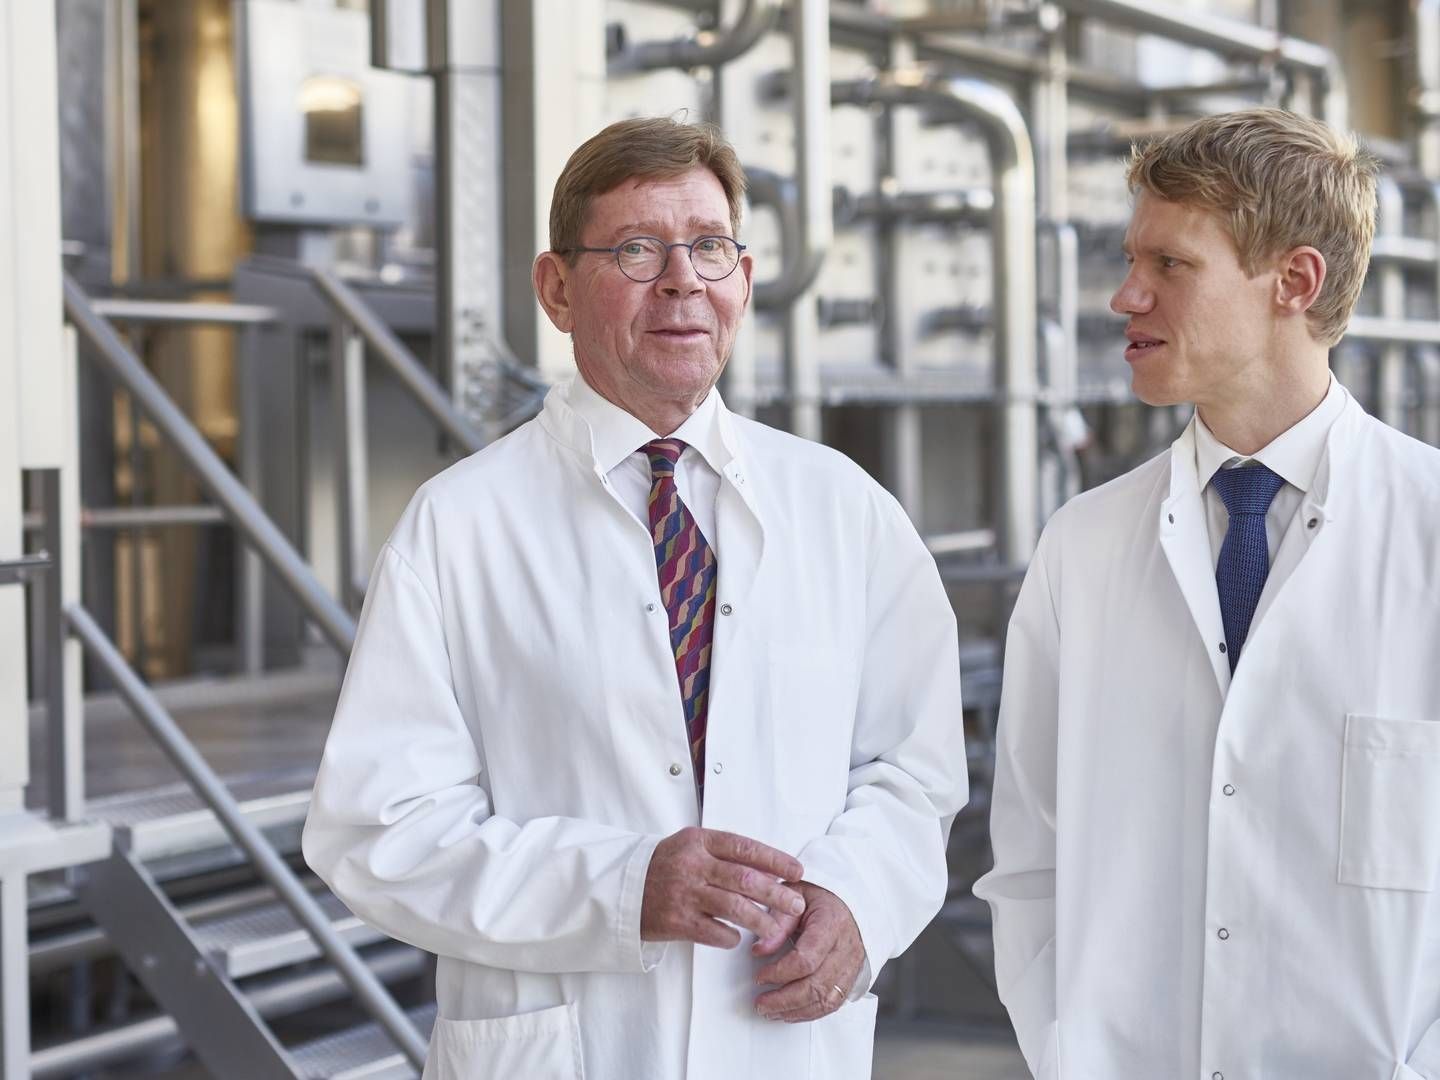 Pharmacosmos's chief operating officer, Tobias S. Christensen (right), and chief executive officer, Lars Christensen (left) | Photo: Pharmacosmos / PR